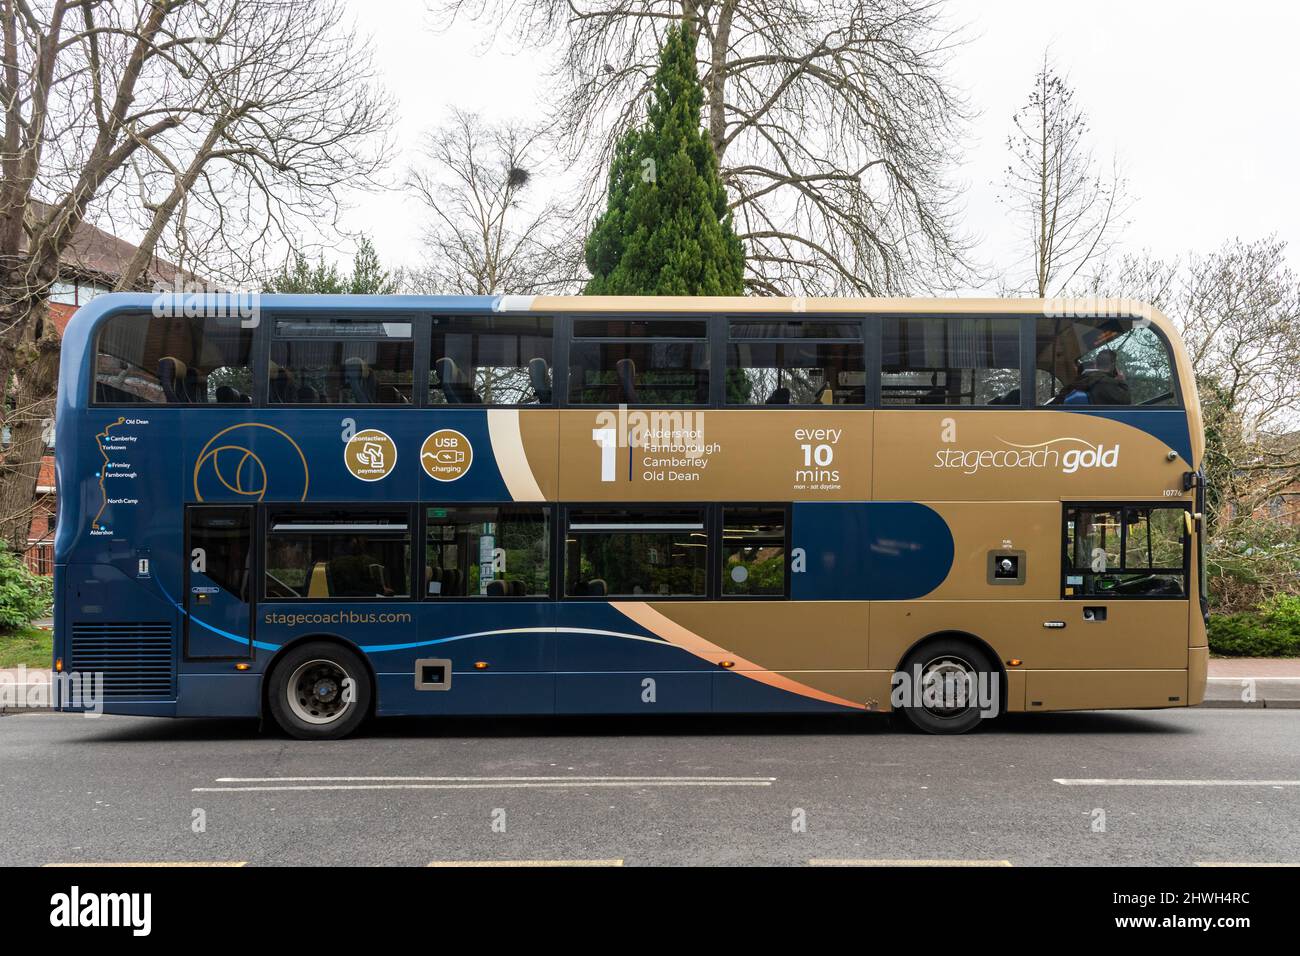 Stagecoach gold double-decker bus, public transport vehicle in Camberley, Surrey, England, UK Stock Photo